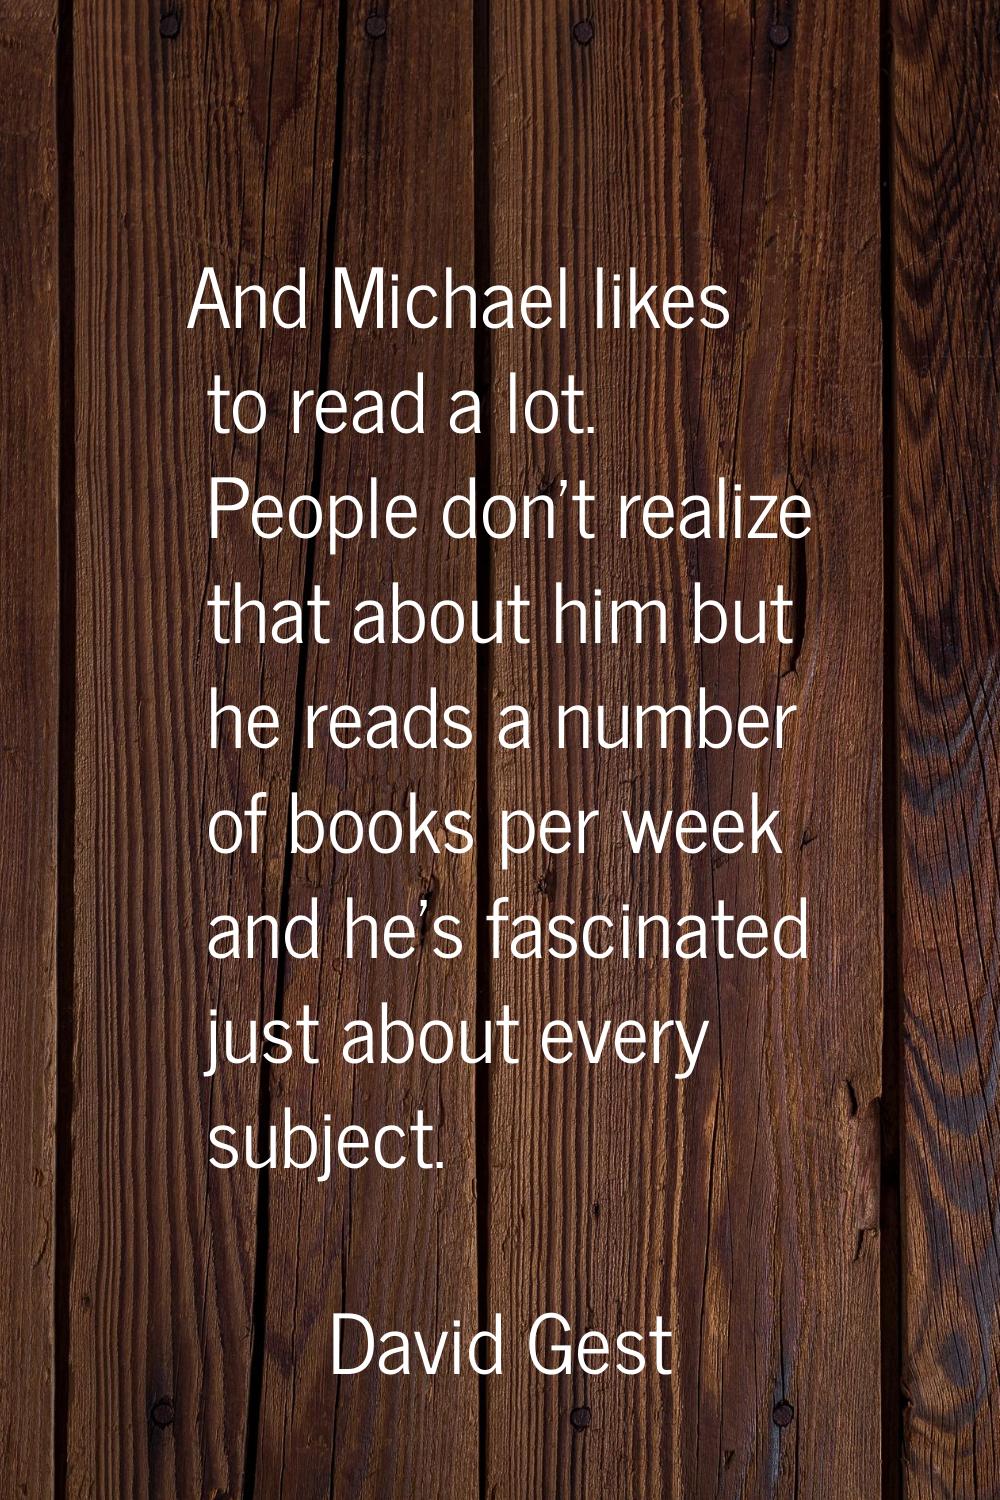 And Michael likes to read a lot. People don't realize that about him but he reads a number of books